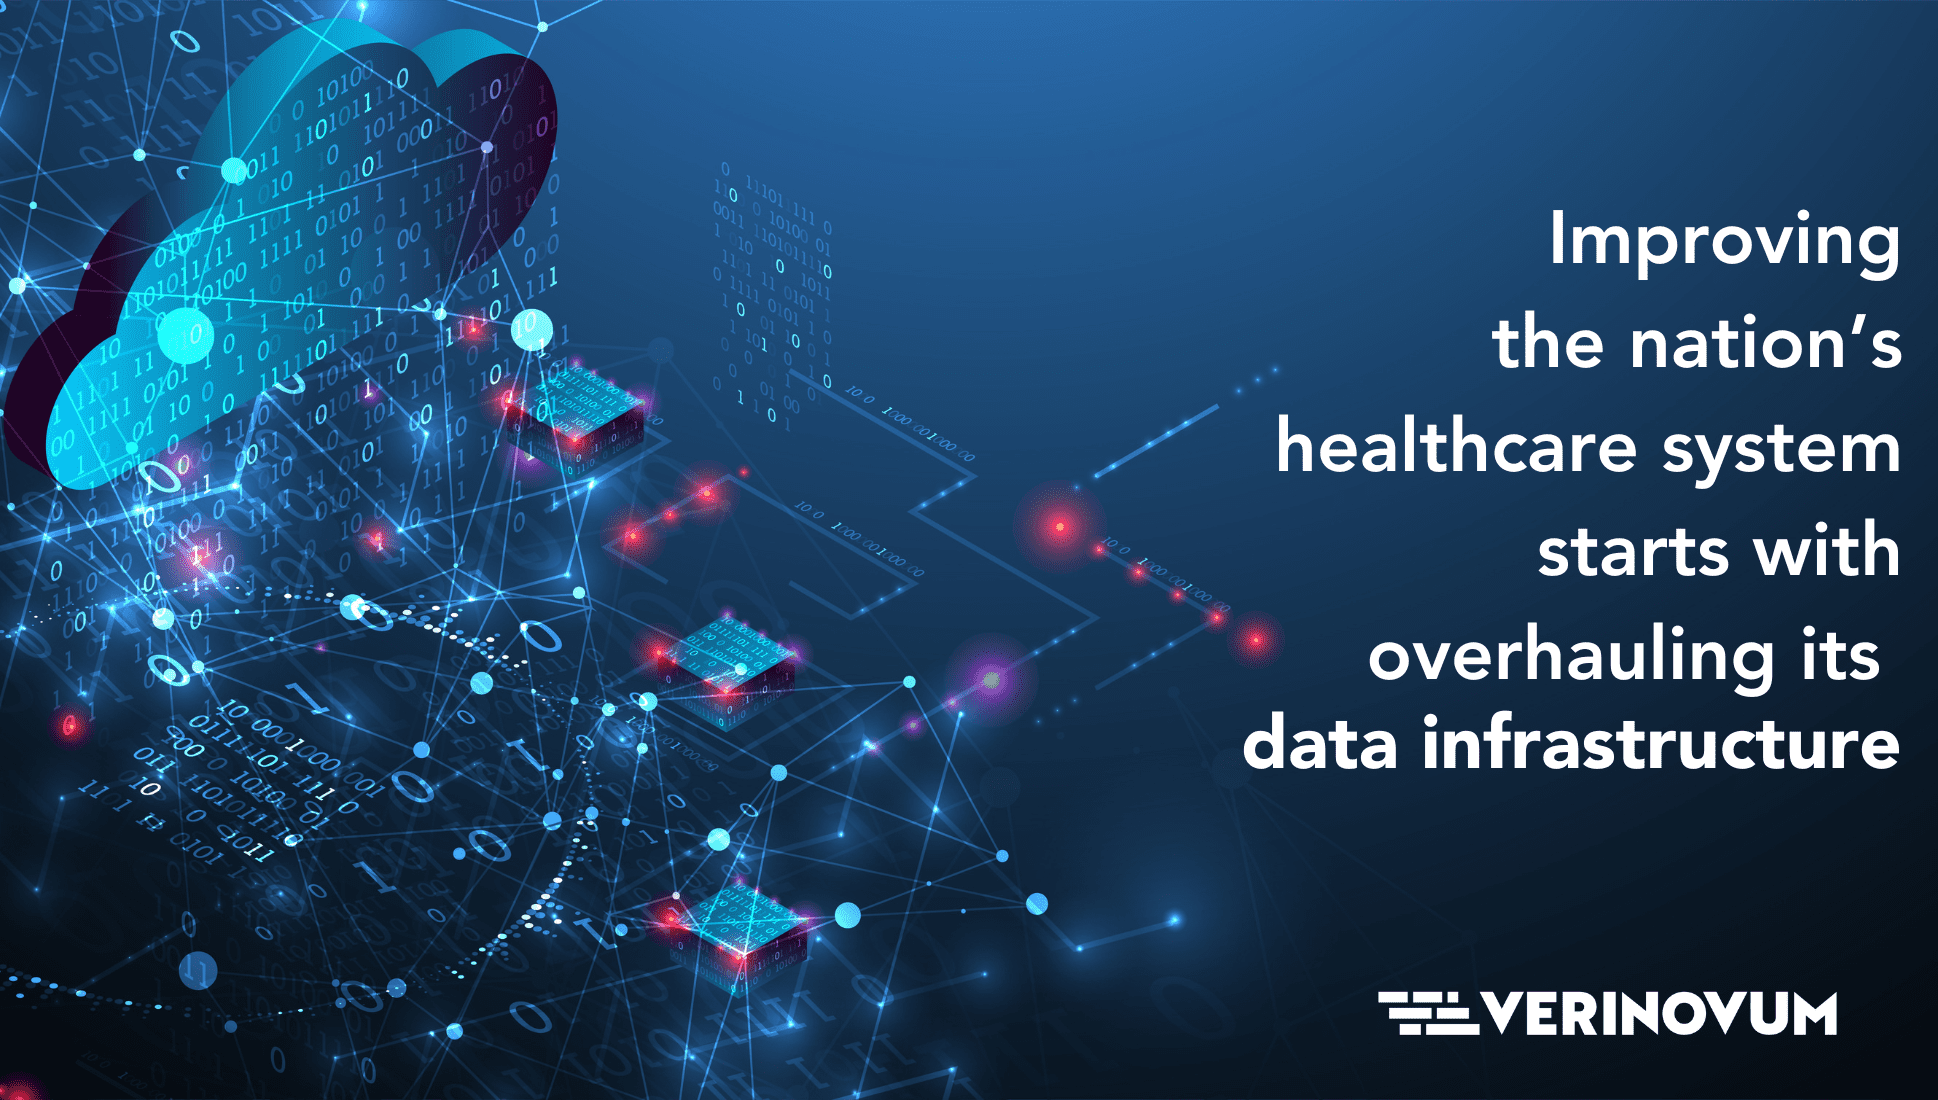 Data cloud with Improving the nation’s healthcare system starts with overhauling its data infrastructure